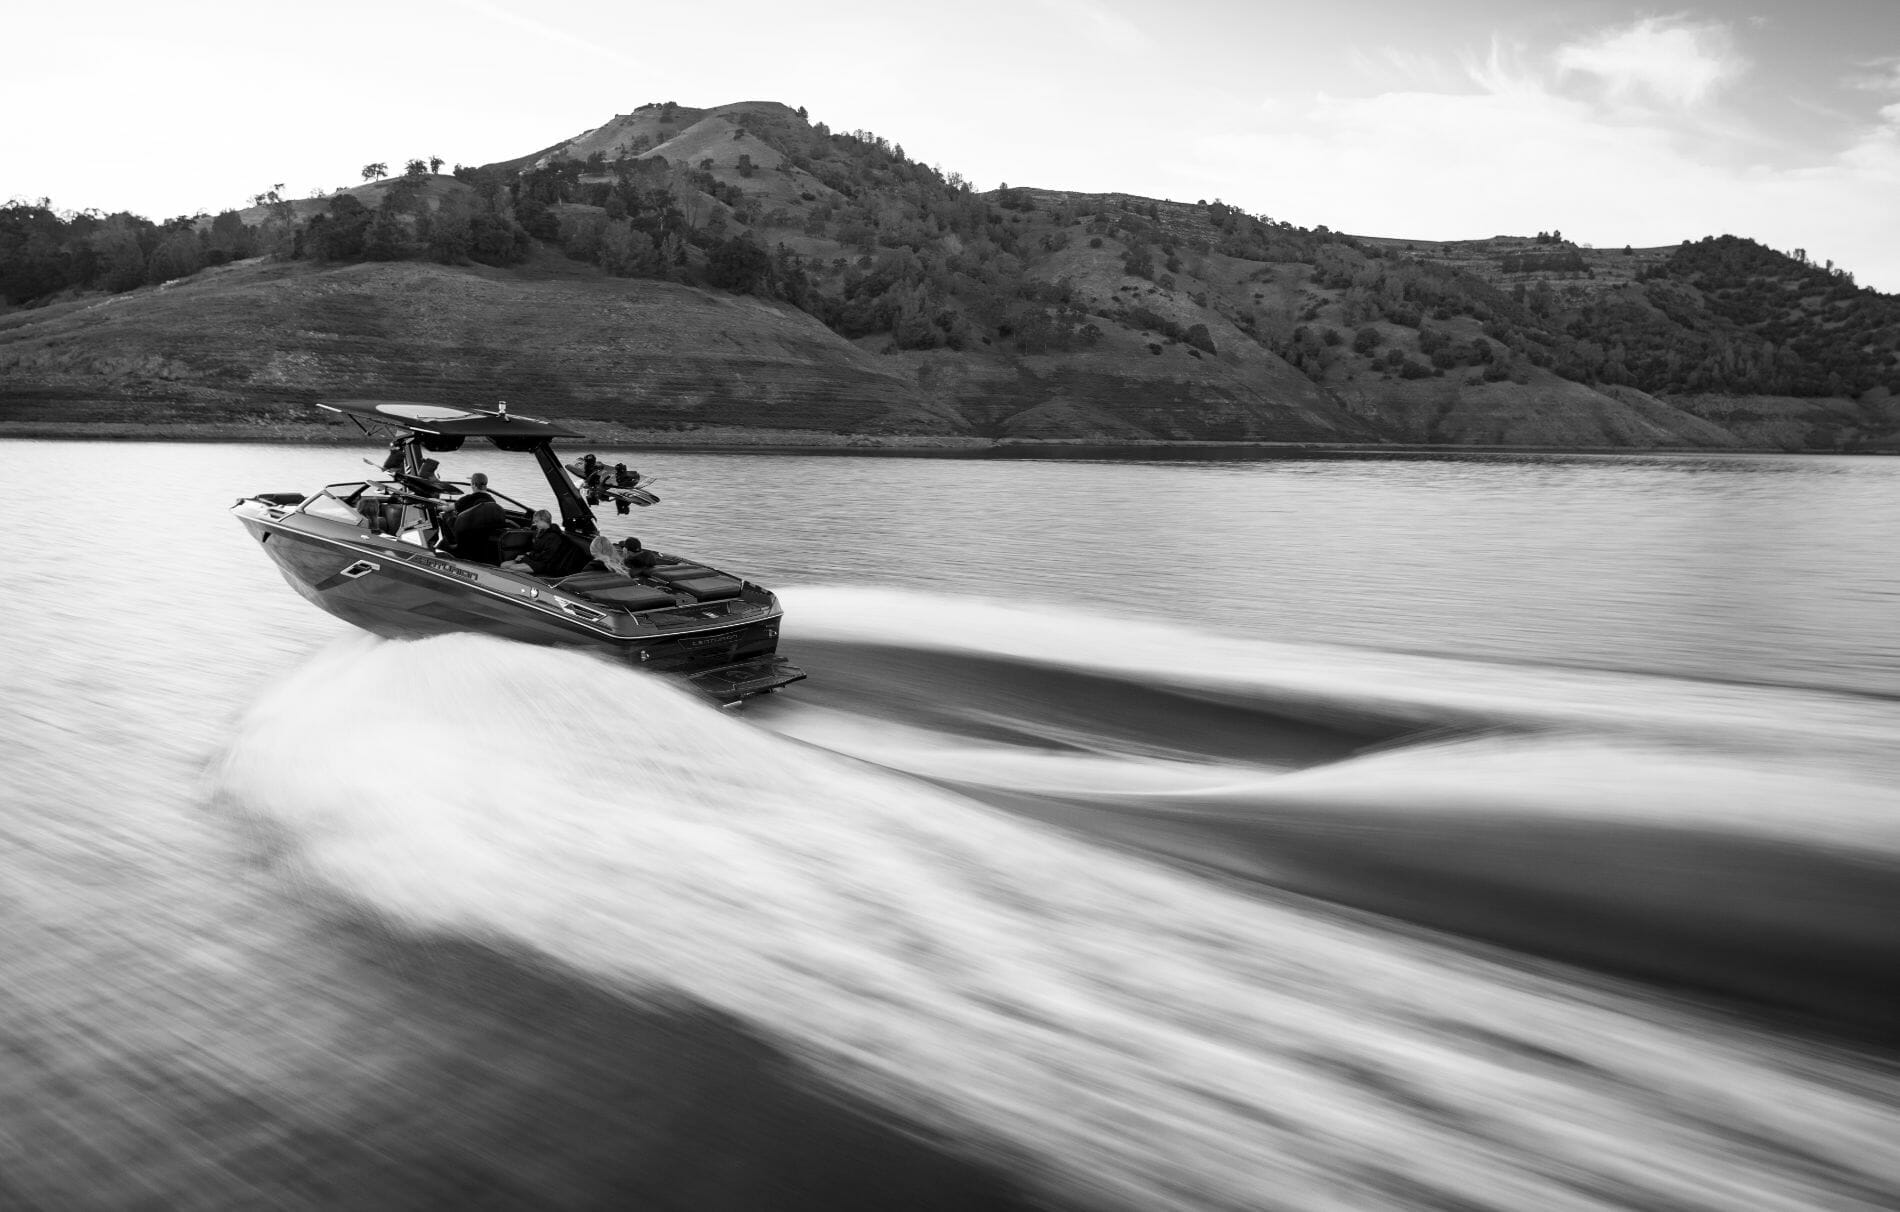 A black and white photo of a wakesurf boat on the water.